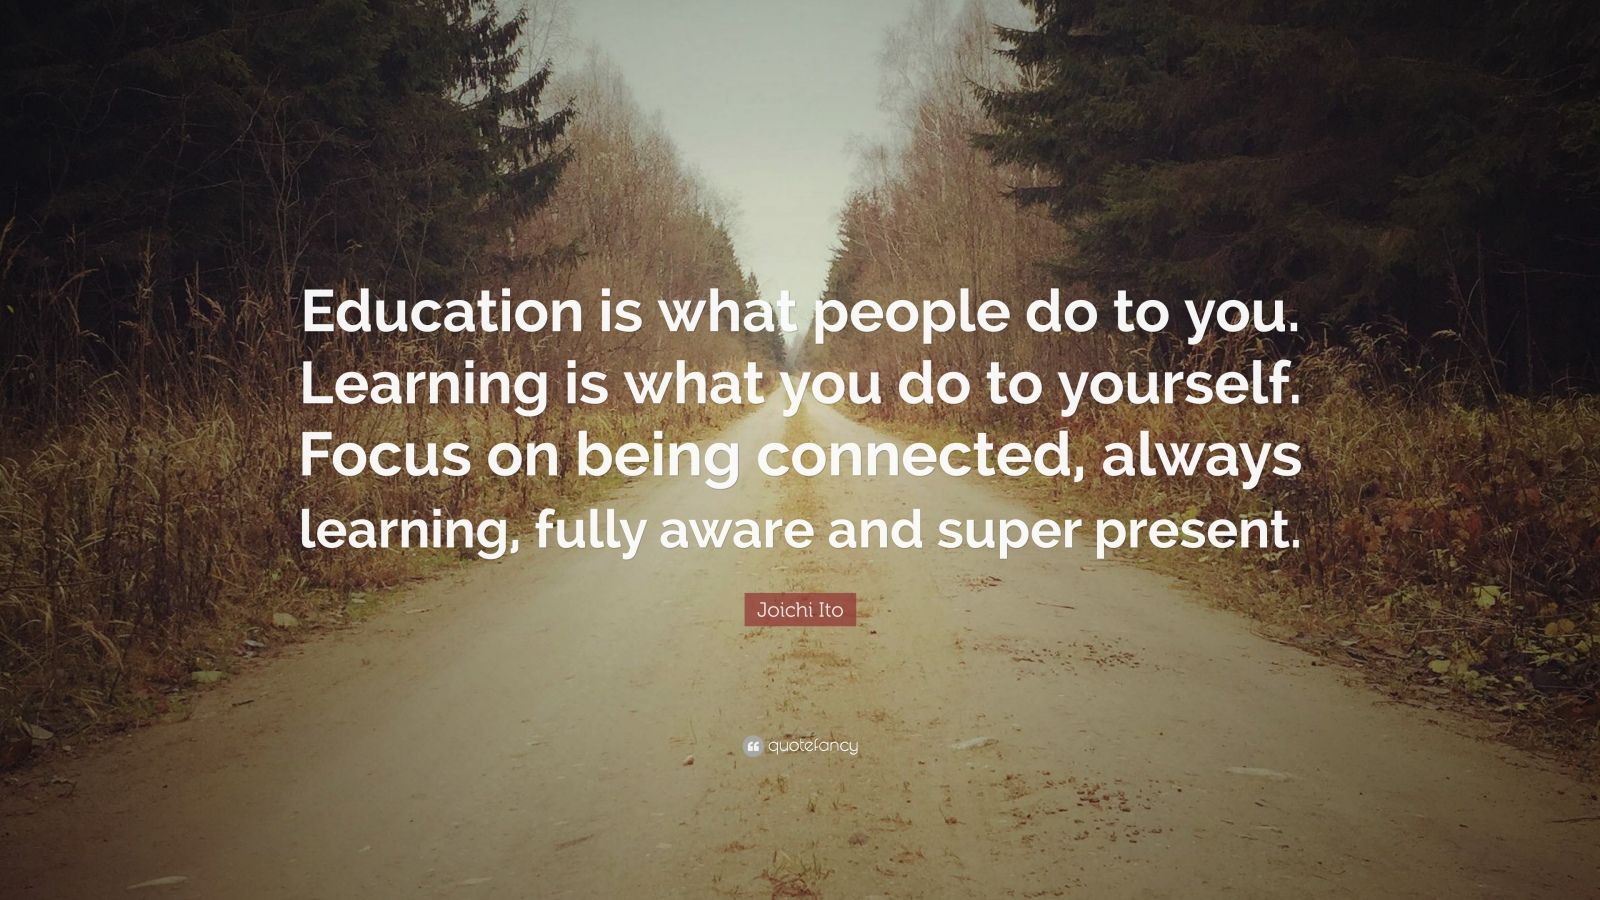 Joichi Ito Quote: “Education is what people do to you. Learning is what